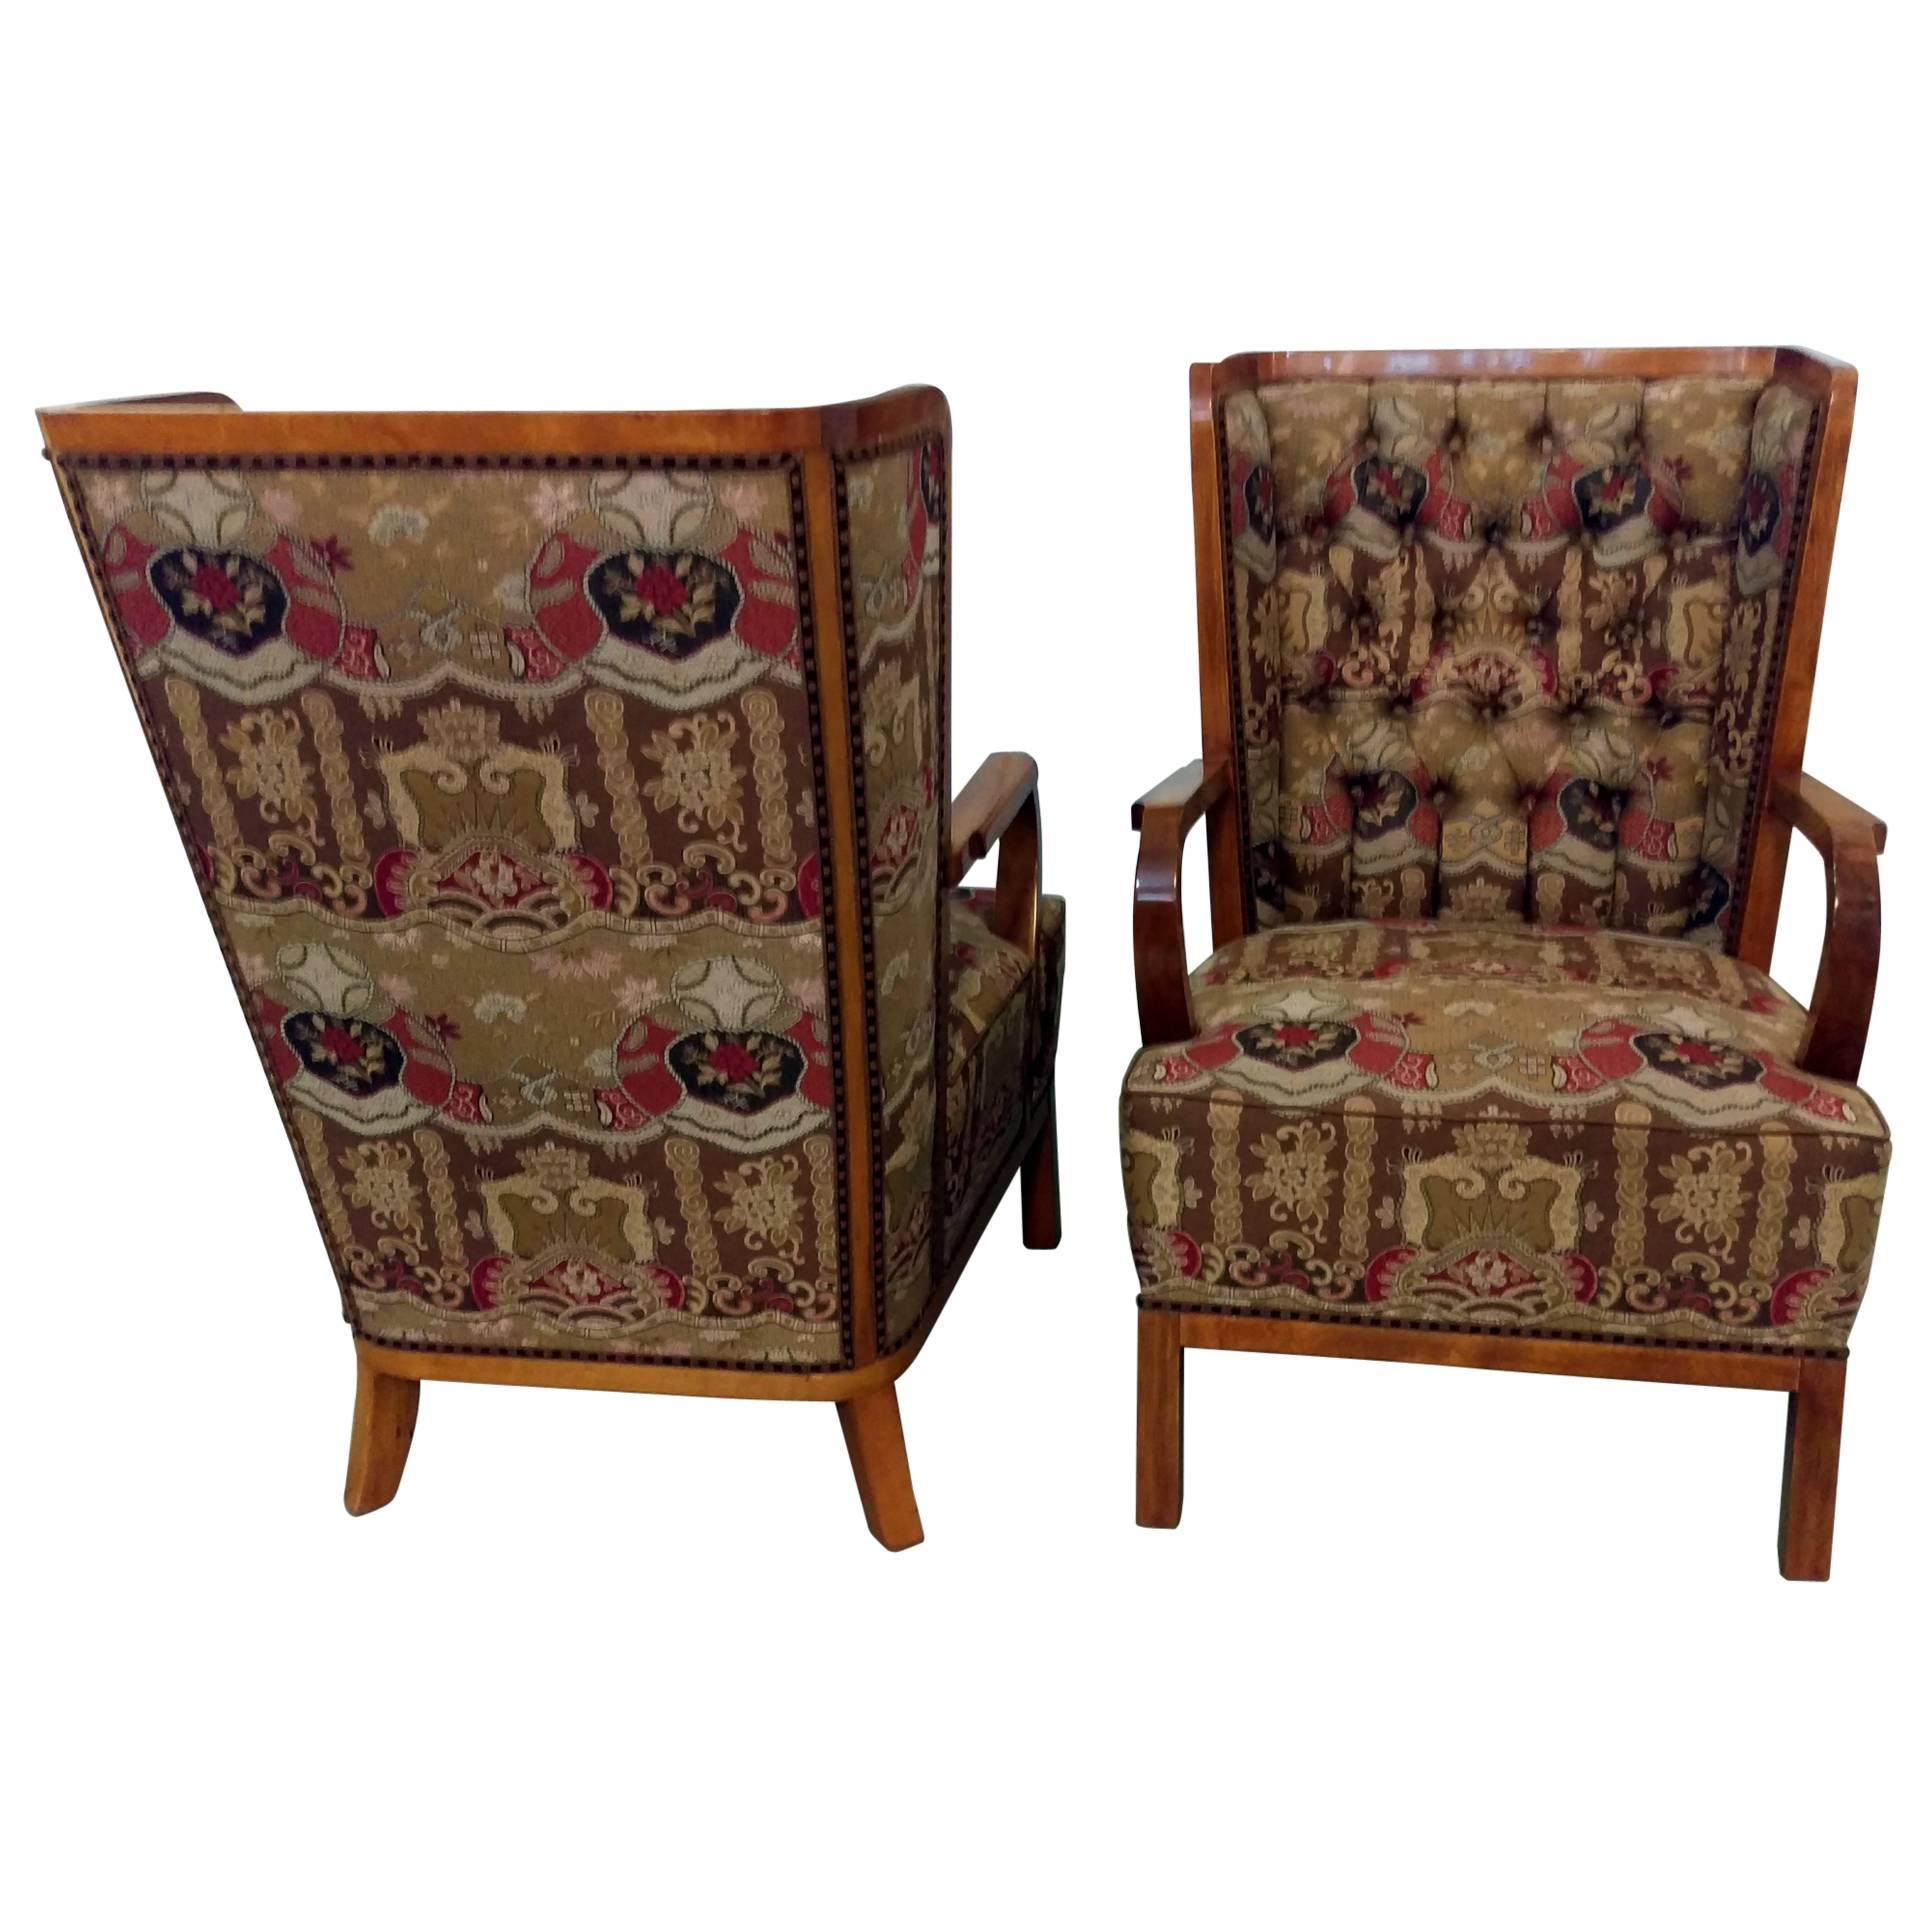 Fabulous pair of stylish and extremely comfortable wingback lounges. Masterfully crafted wood framed, upholstered in French silk jacquard, deep cushion seat with buttons tufted. Very rare of this exceptional quality and style. Attributed to Jules